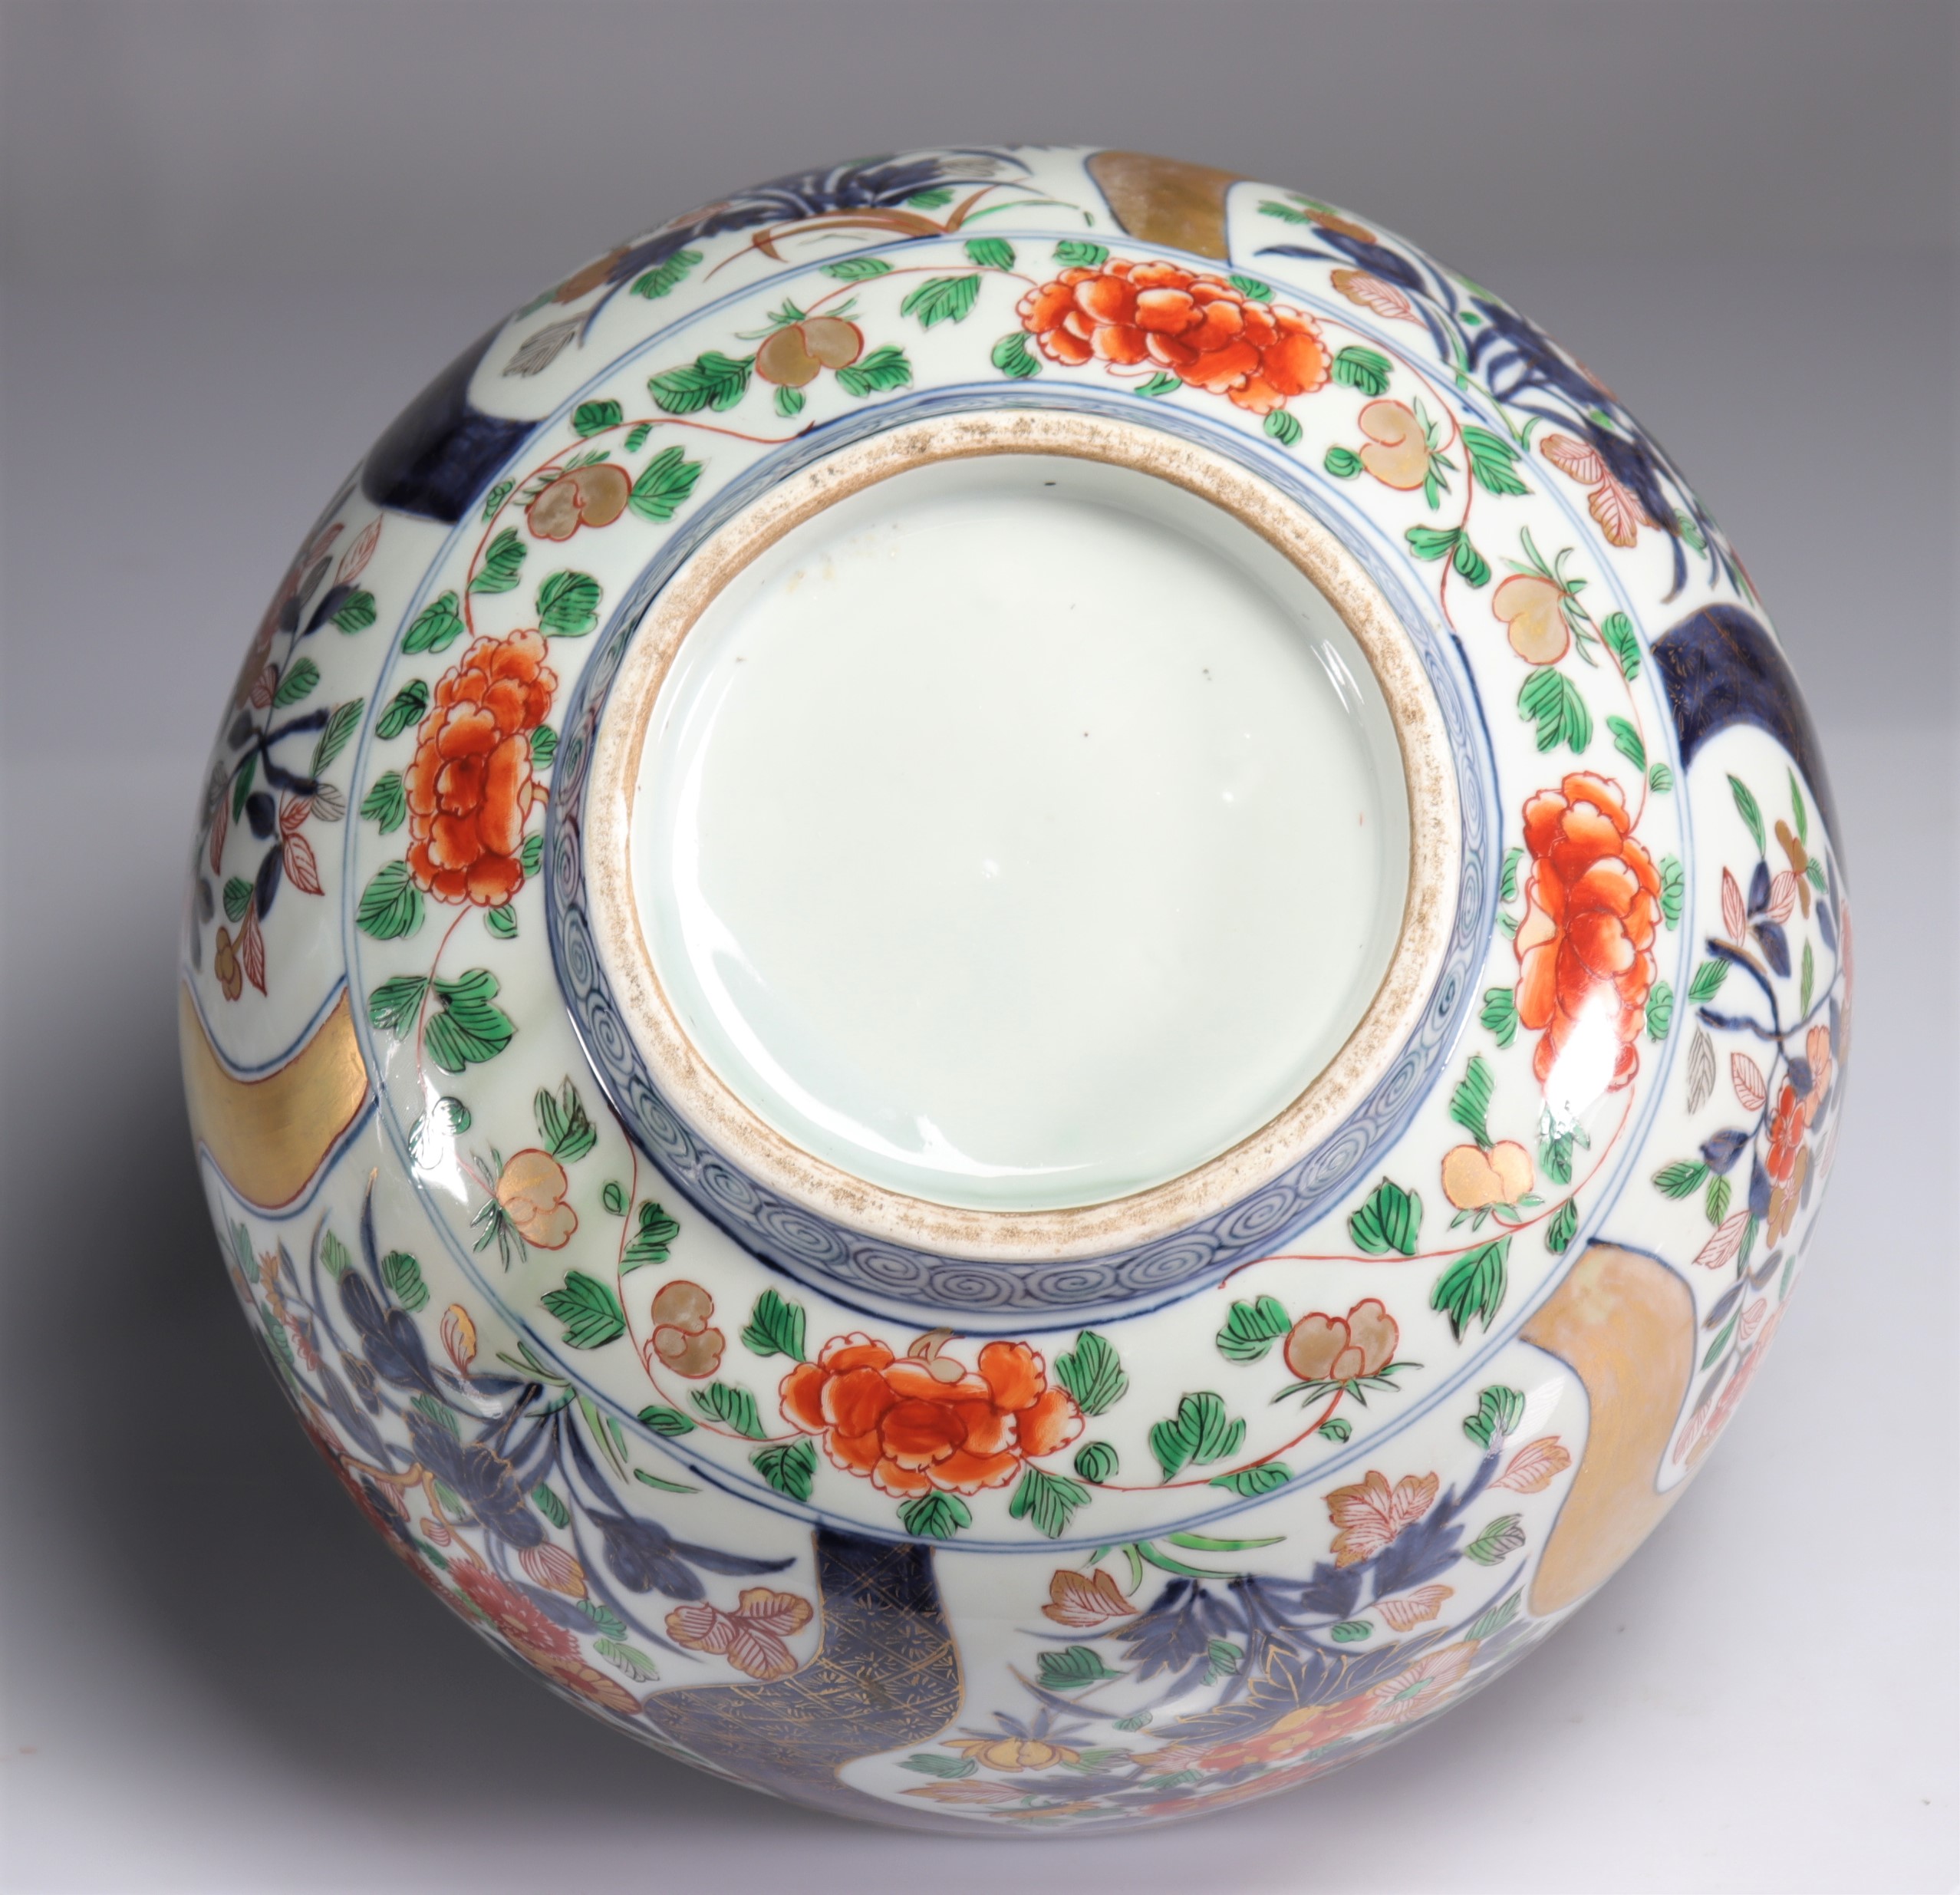 Imposing covered bowl in 18th century Japanese porcelain - Image 7 of 7